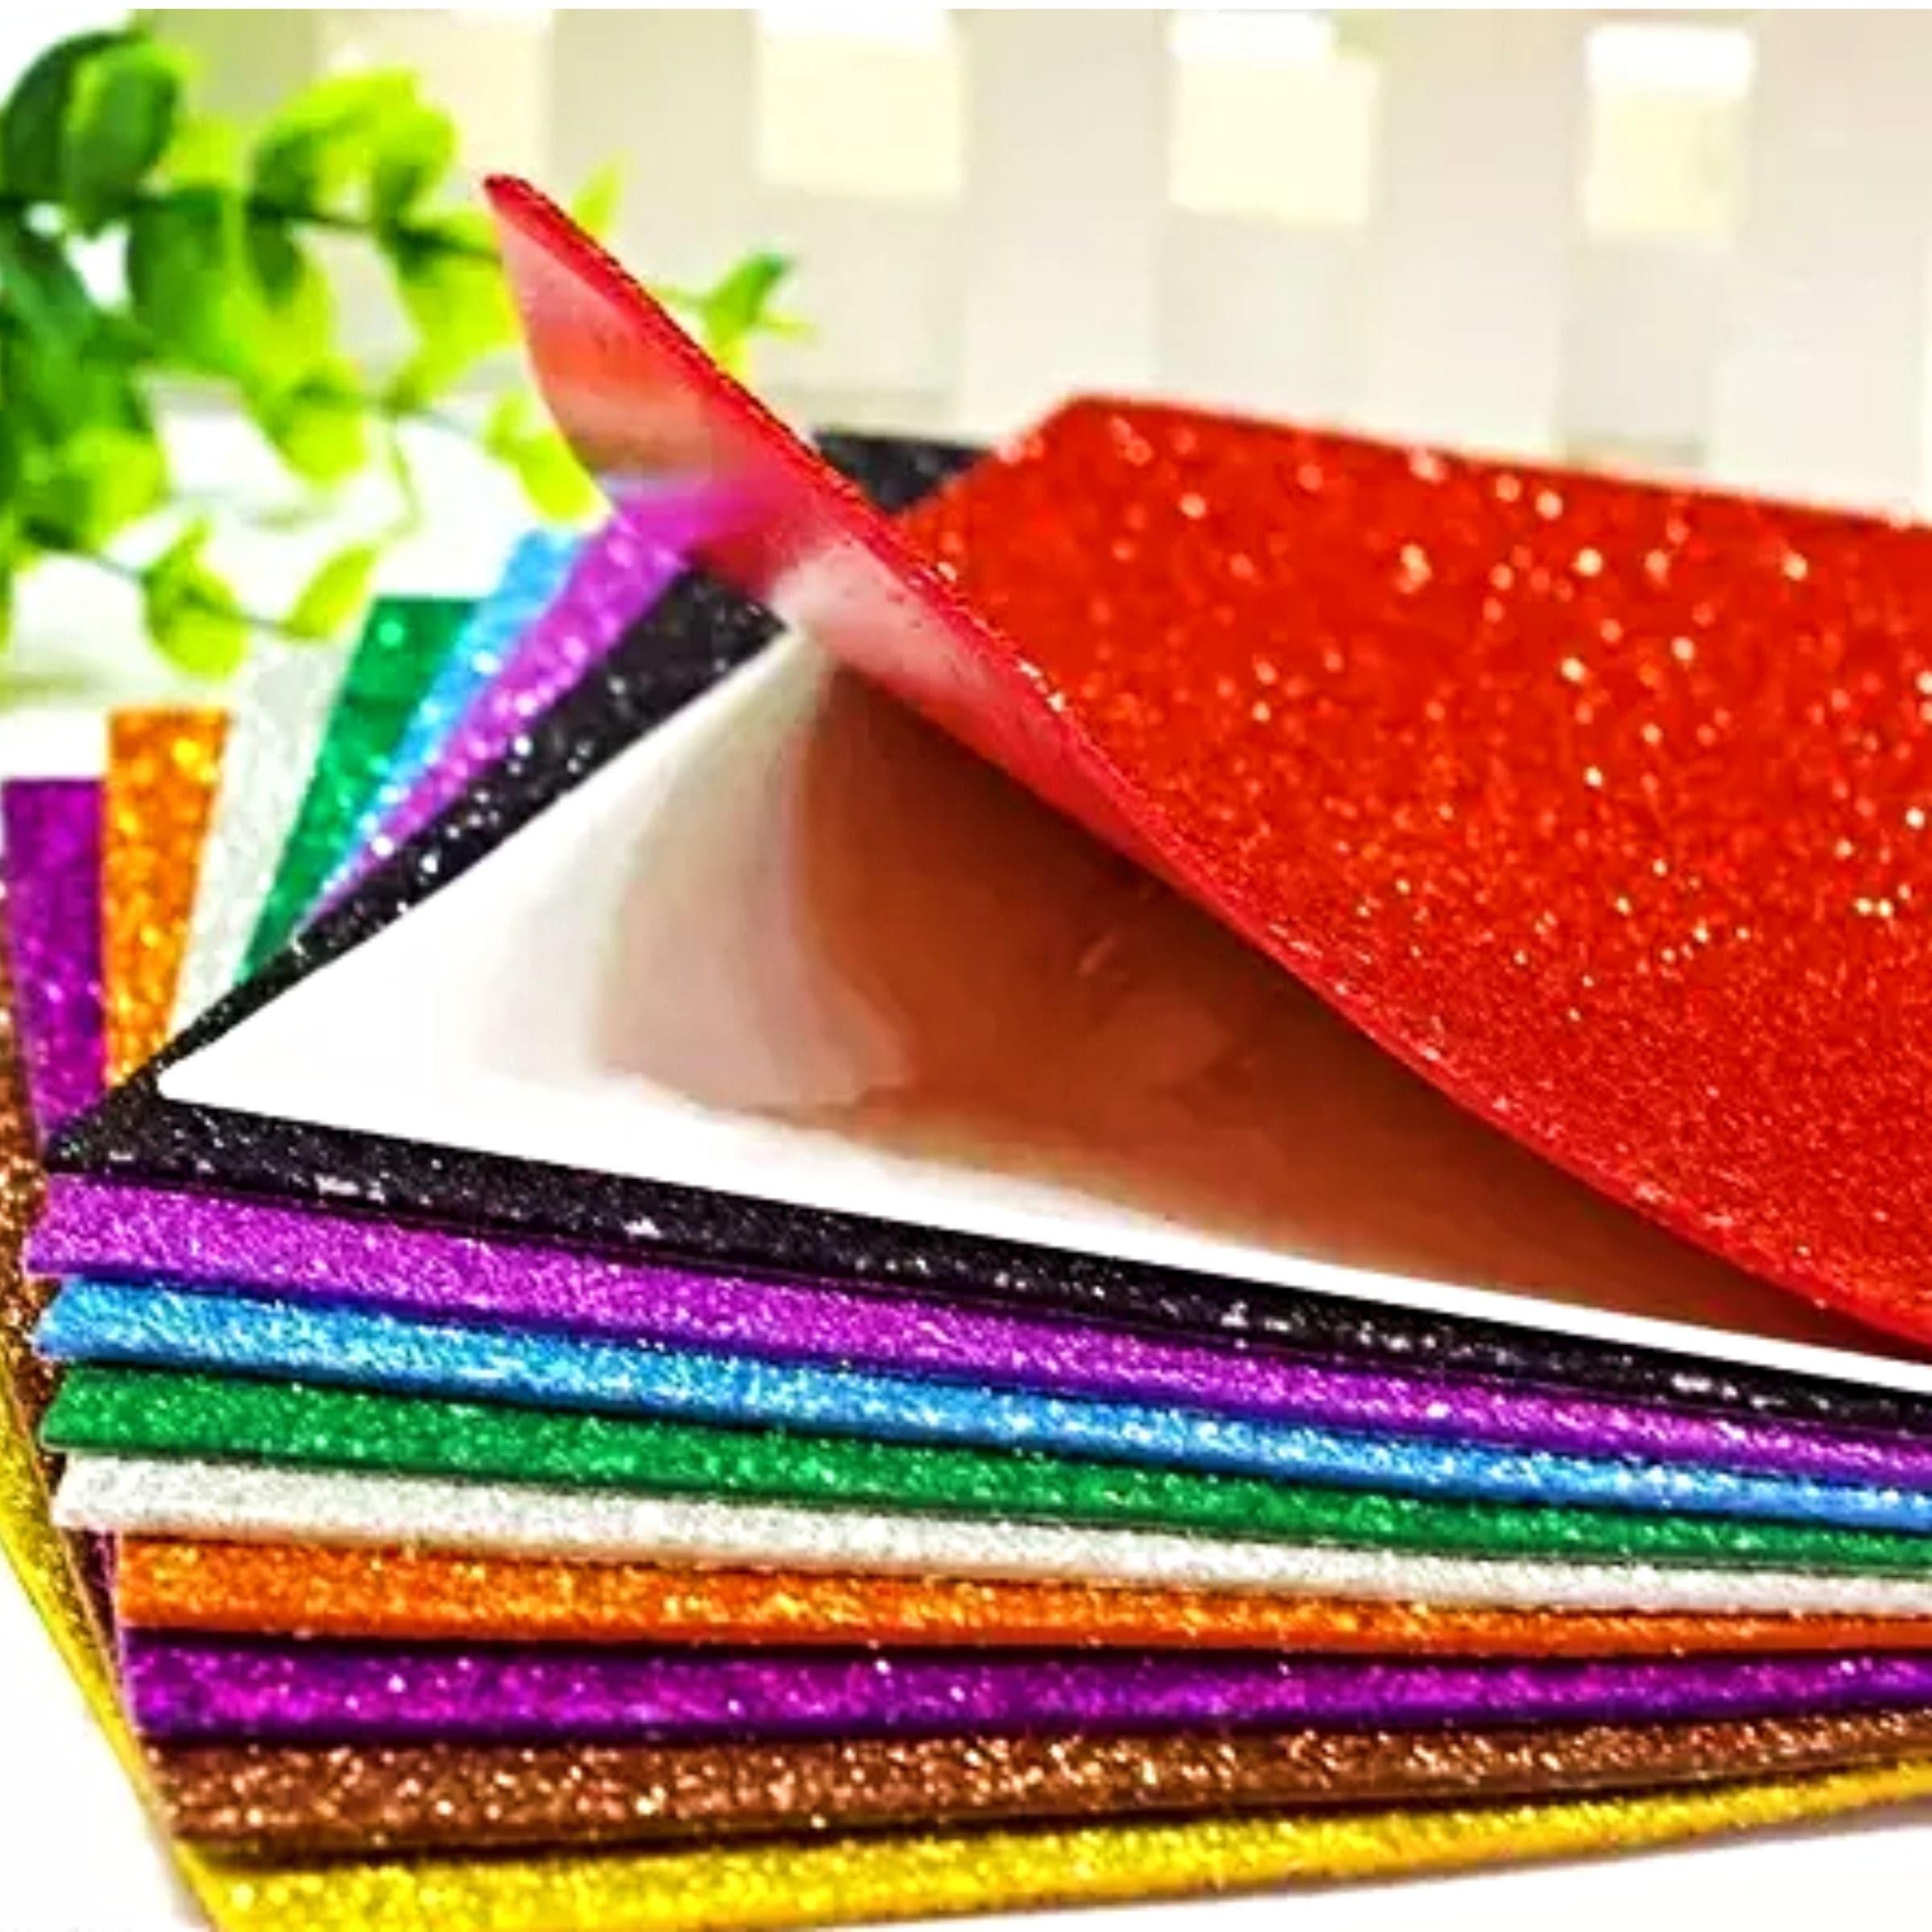 Multicolor Foaming Glitter Sheets A4 Size Pack of 10